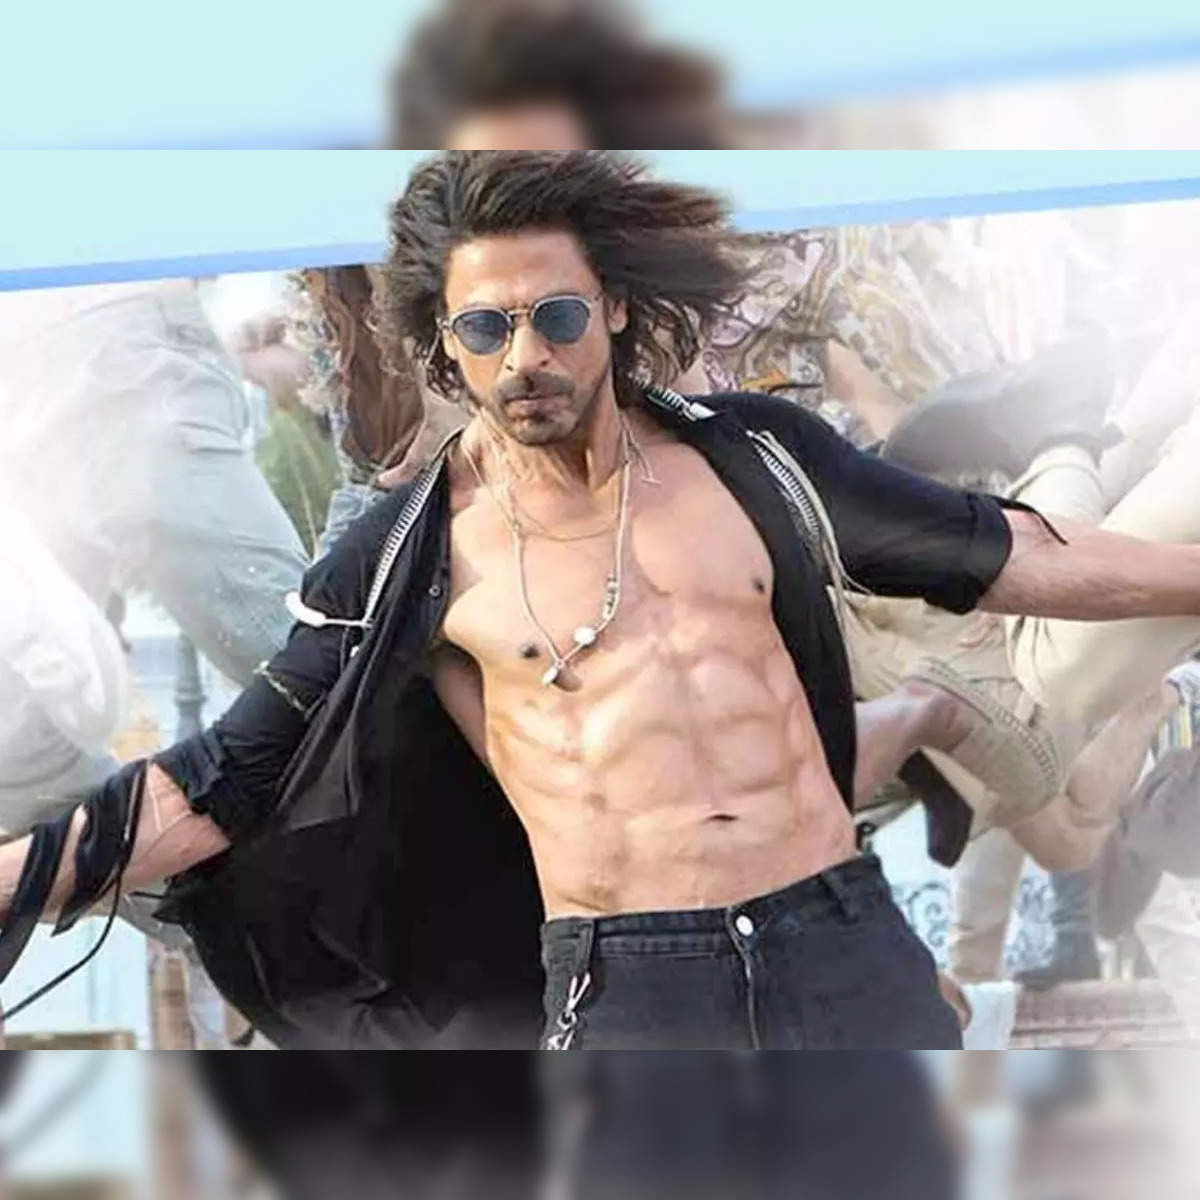 Did SRK wear body suit to fake a toned body in Pathaan? Viral